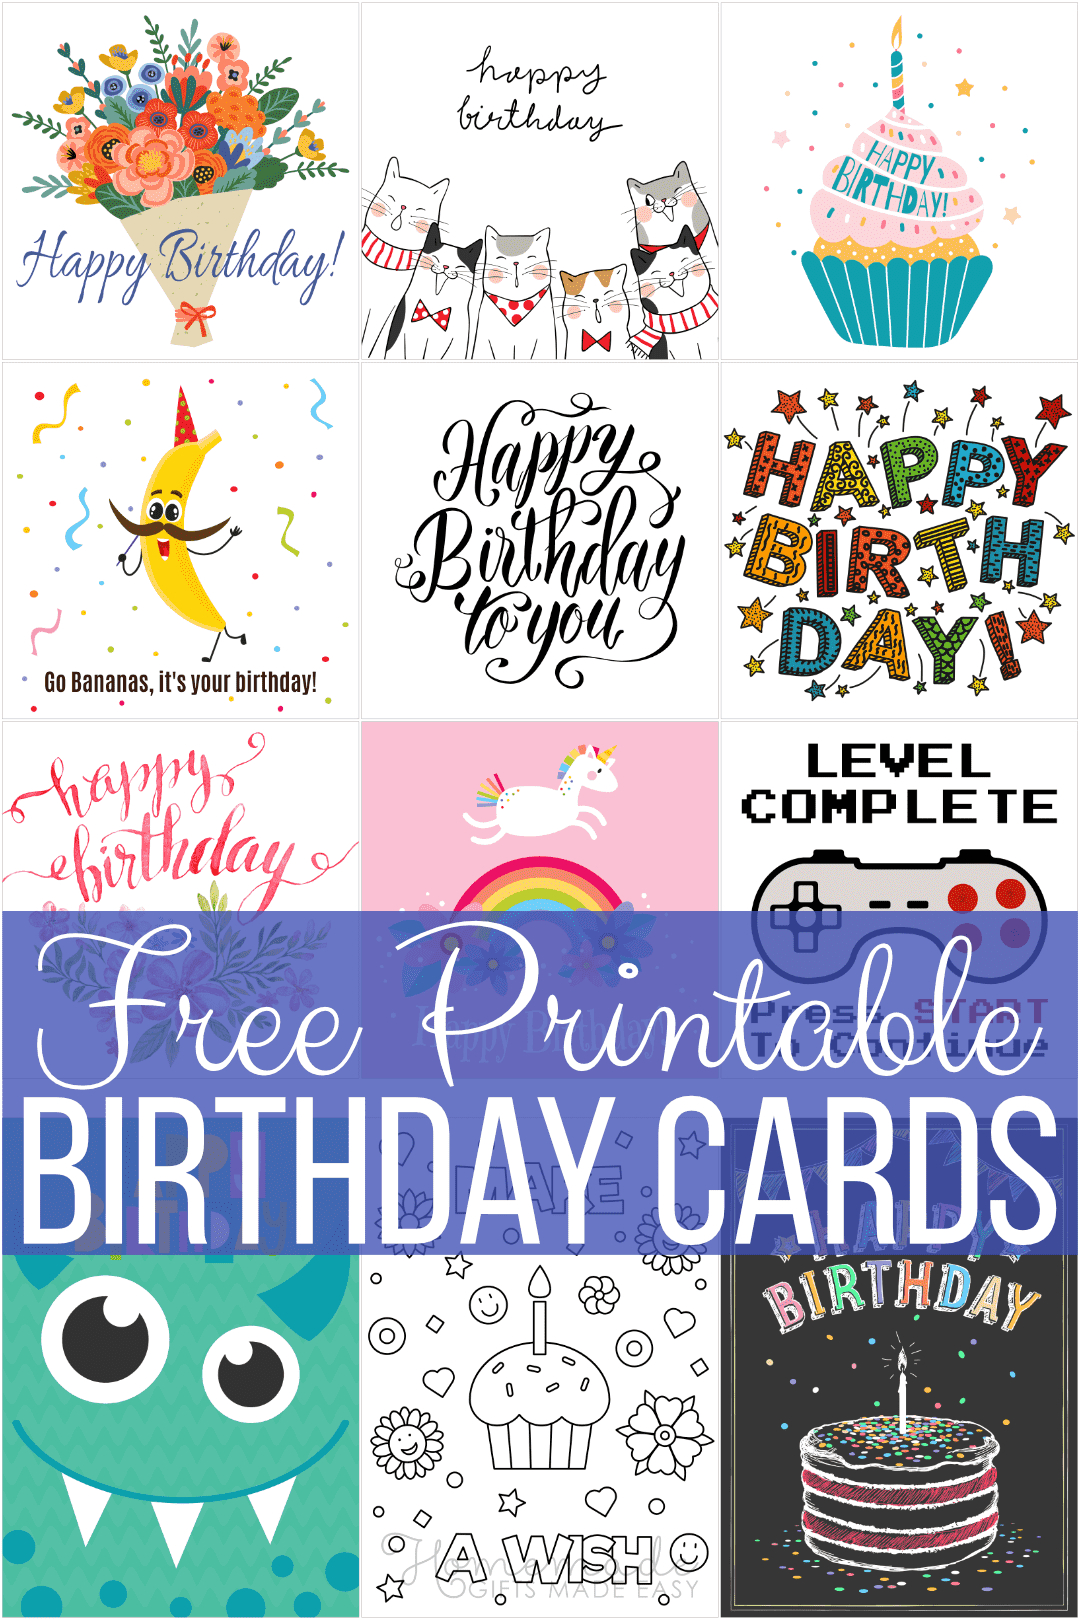 Free Printable Birthday Cards For Everyone within Free Birthday Printables